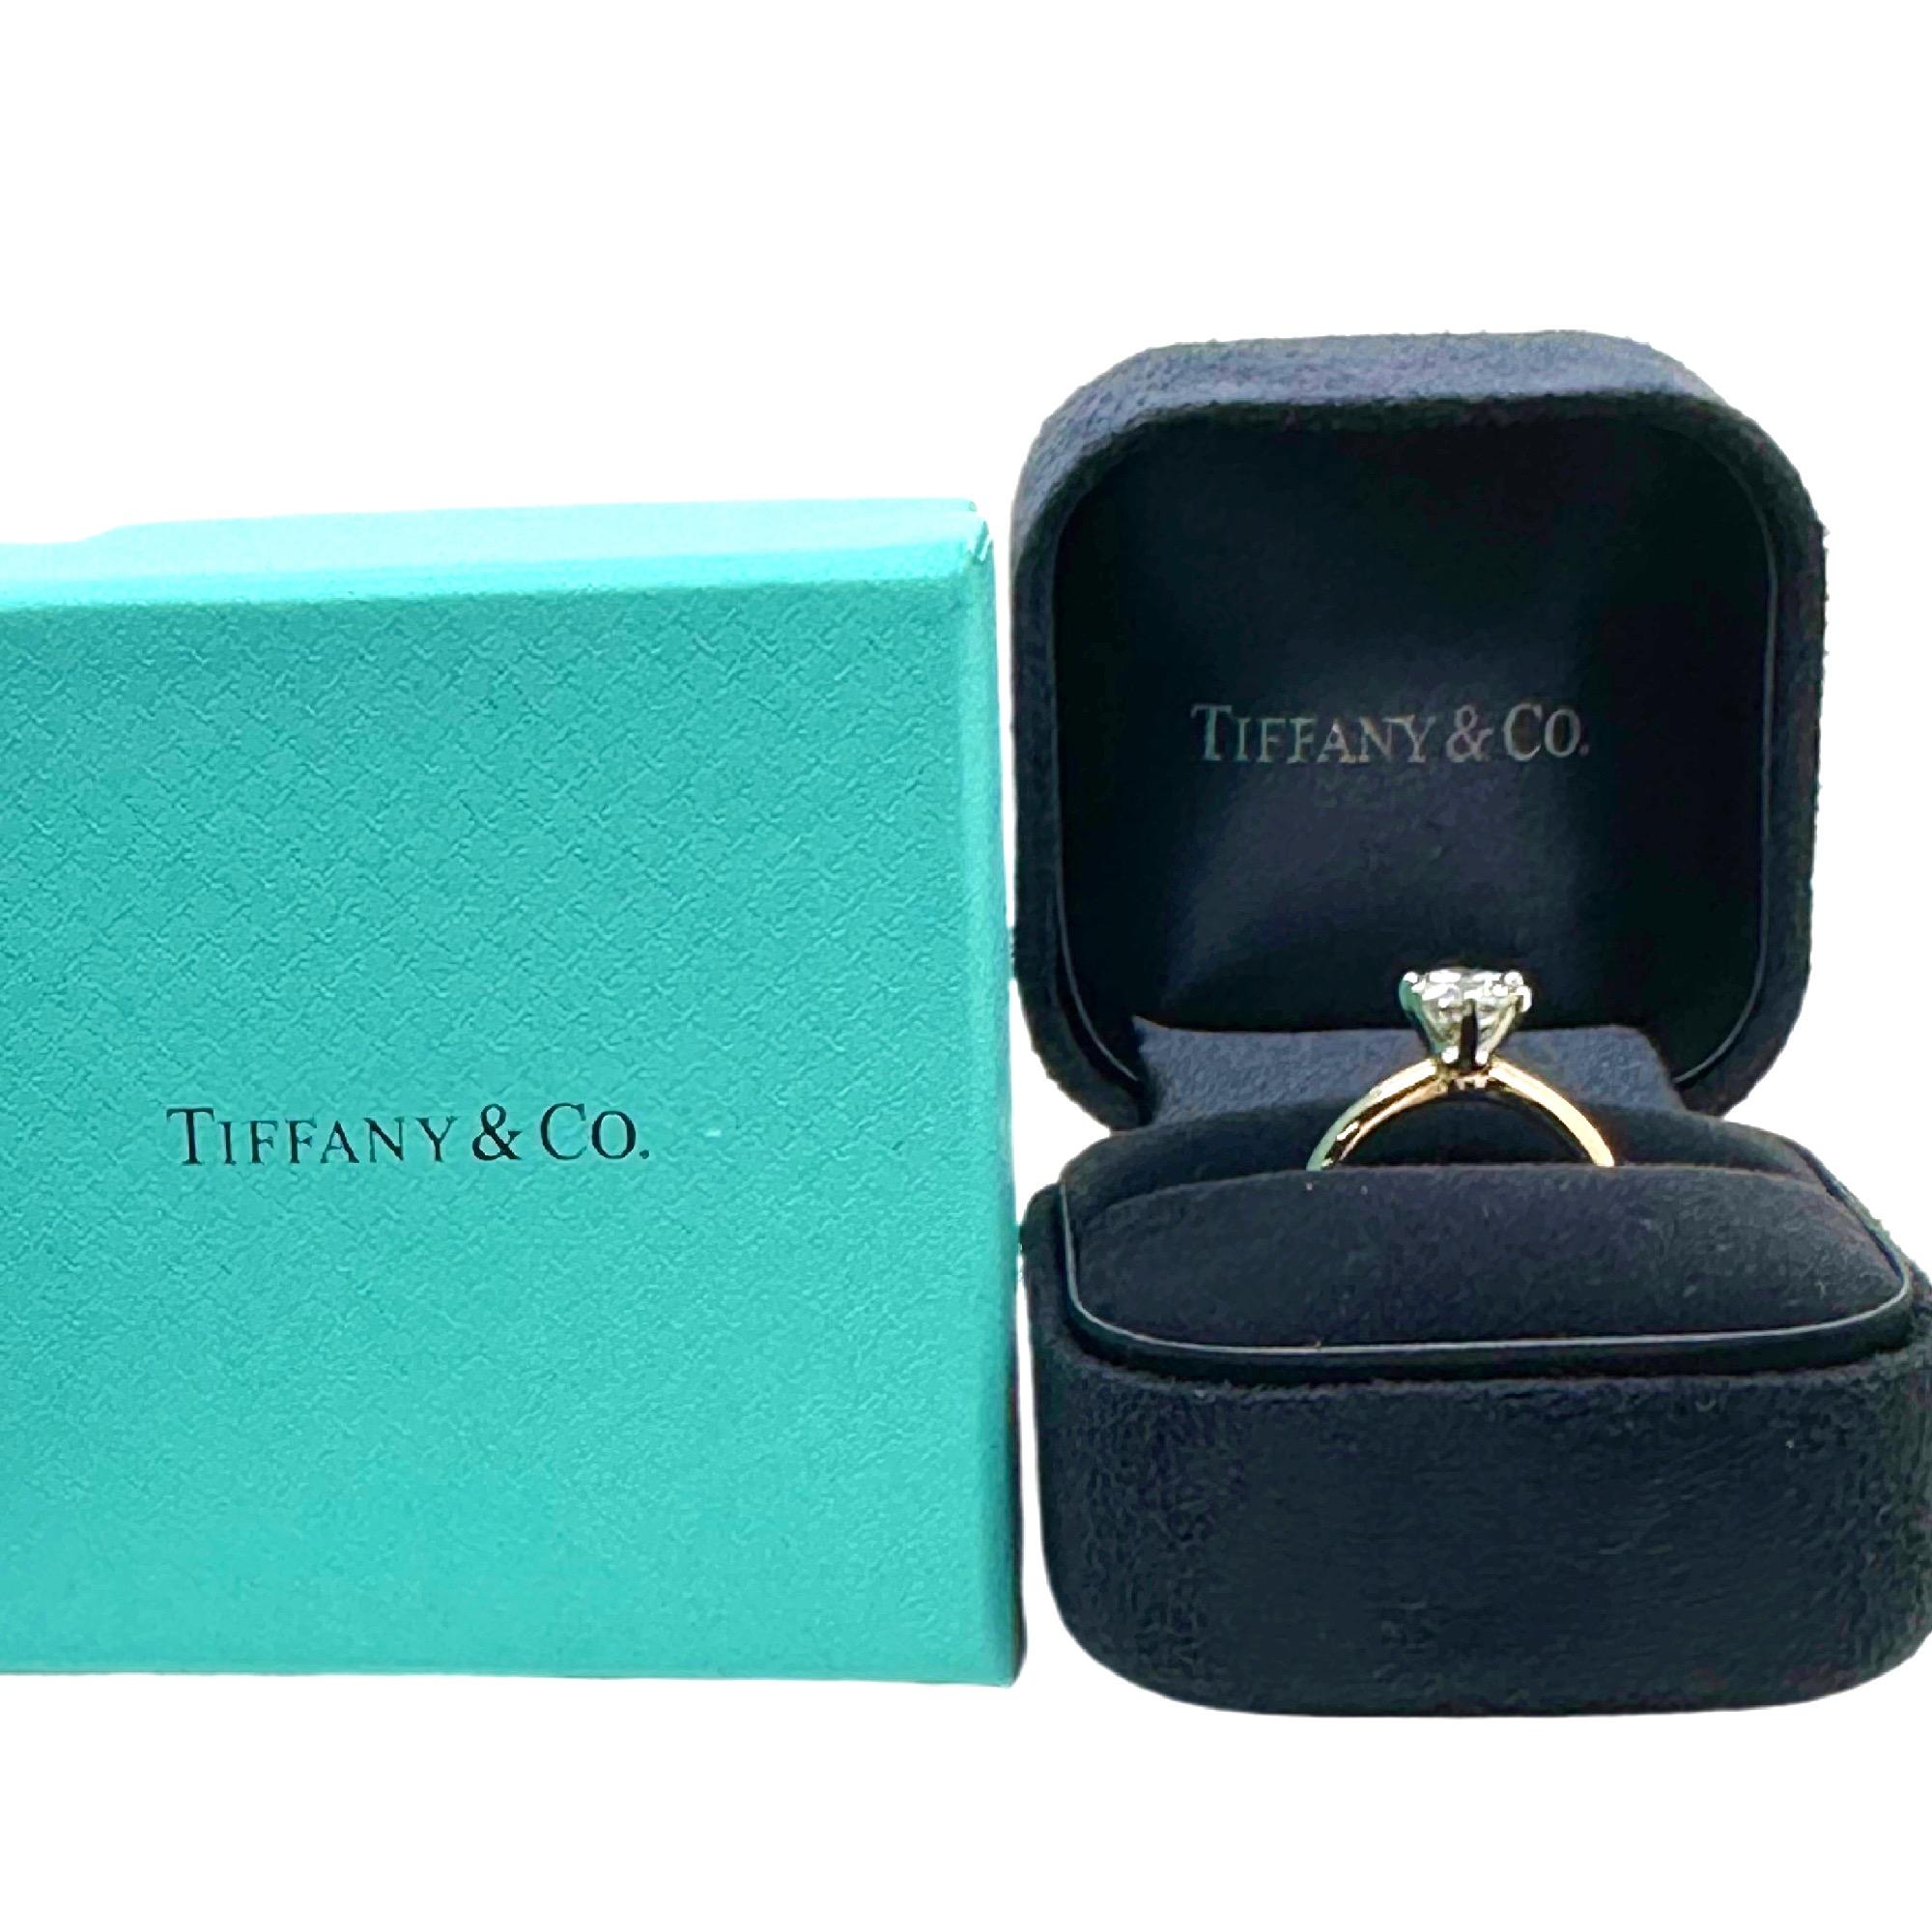 Tiffany & Co Tiffany Setting Solitaire Diamond Engagment Ring
Style:  Solitaire
Ref. number:  17/21/71317560
Metal:  18kt Rose Gold
Size / Measurements:  4.5 Sizable
TCW:  1.09 cts
Main Diamond:  Round Brilliant Diamond 1.09 cts
Color & Clarity:  I,